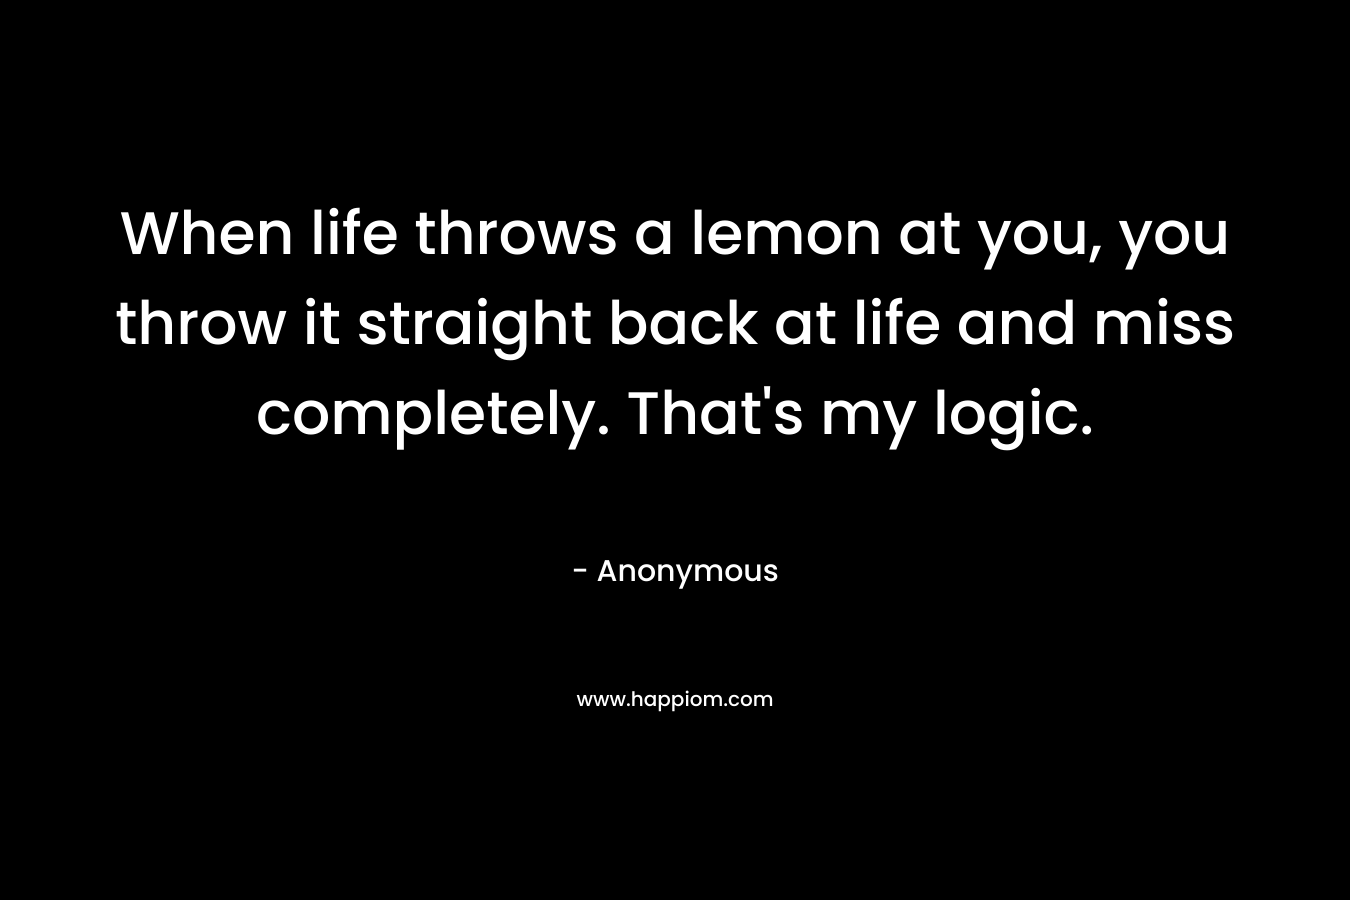 When life throws a lemon at you, you throw it straight back at life and miss completely. That’s my logic. – Anonymous